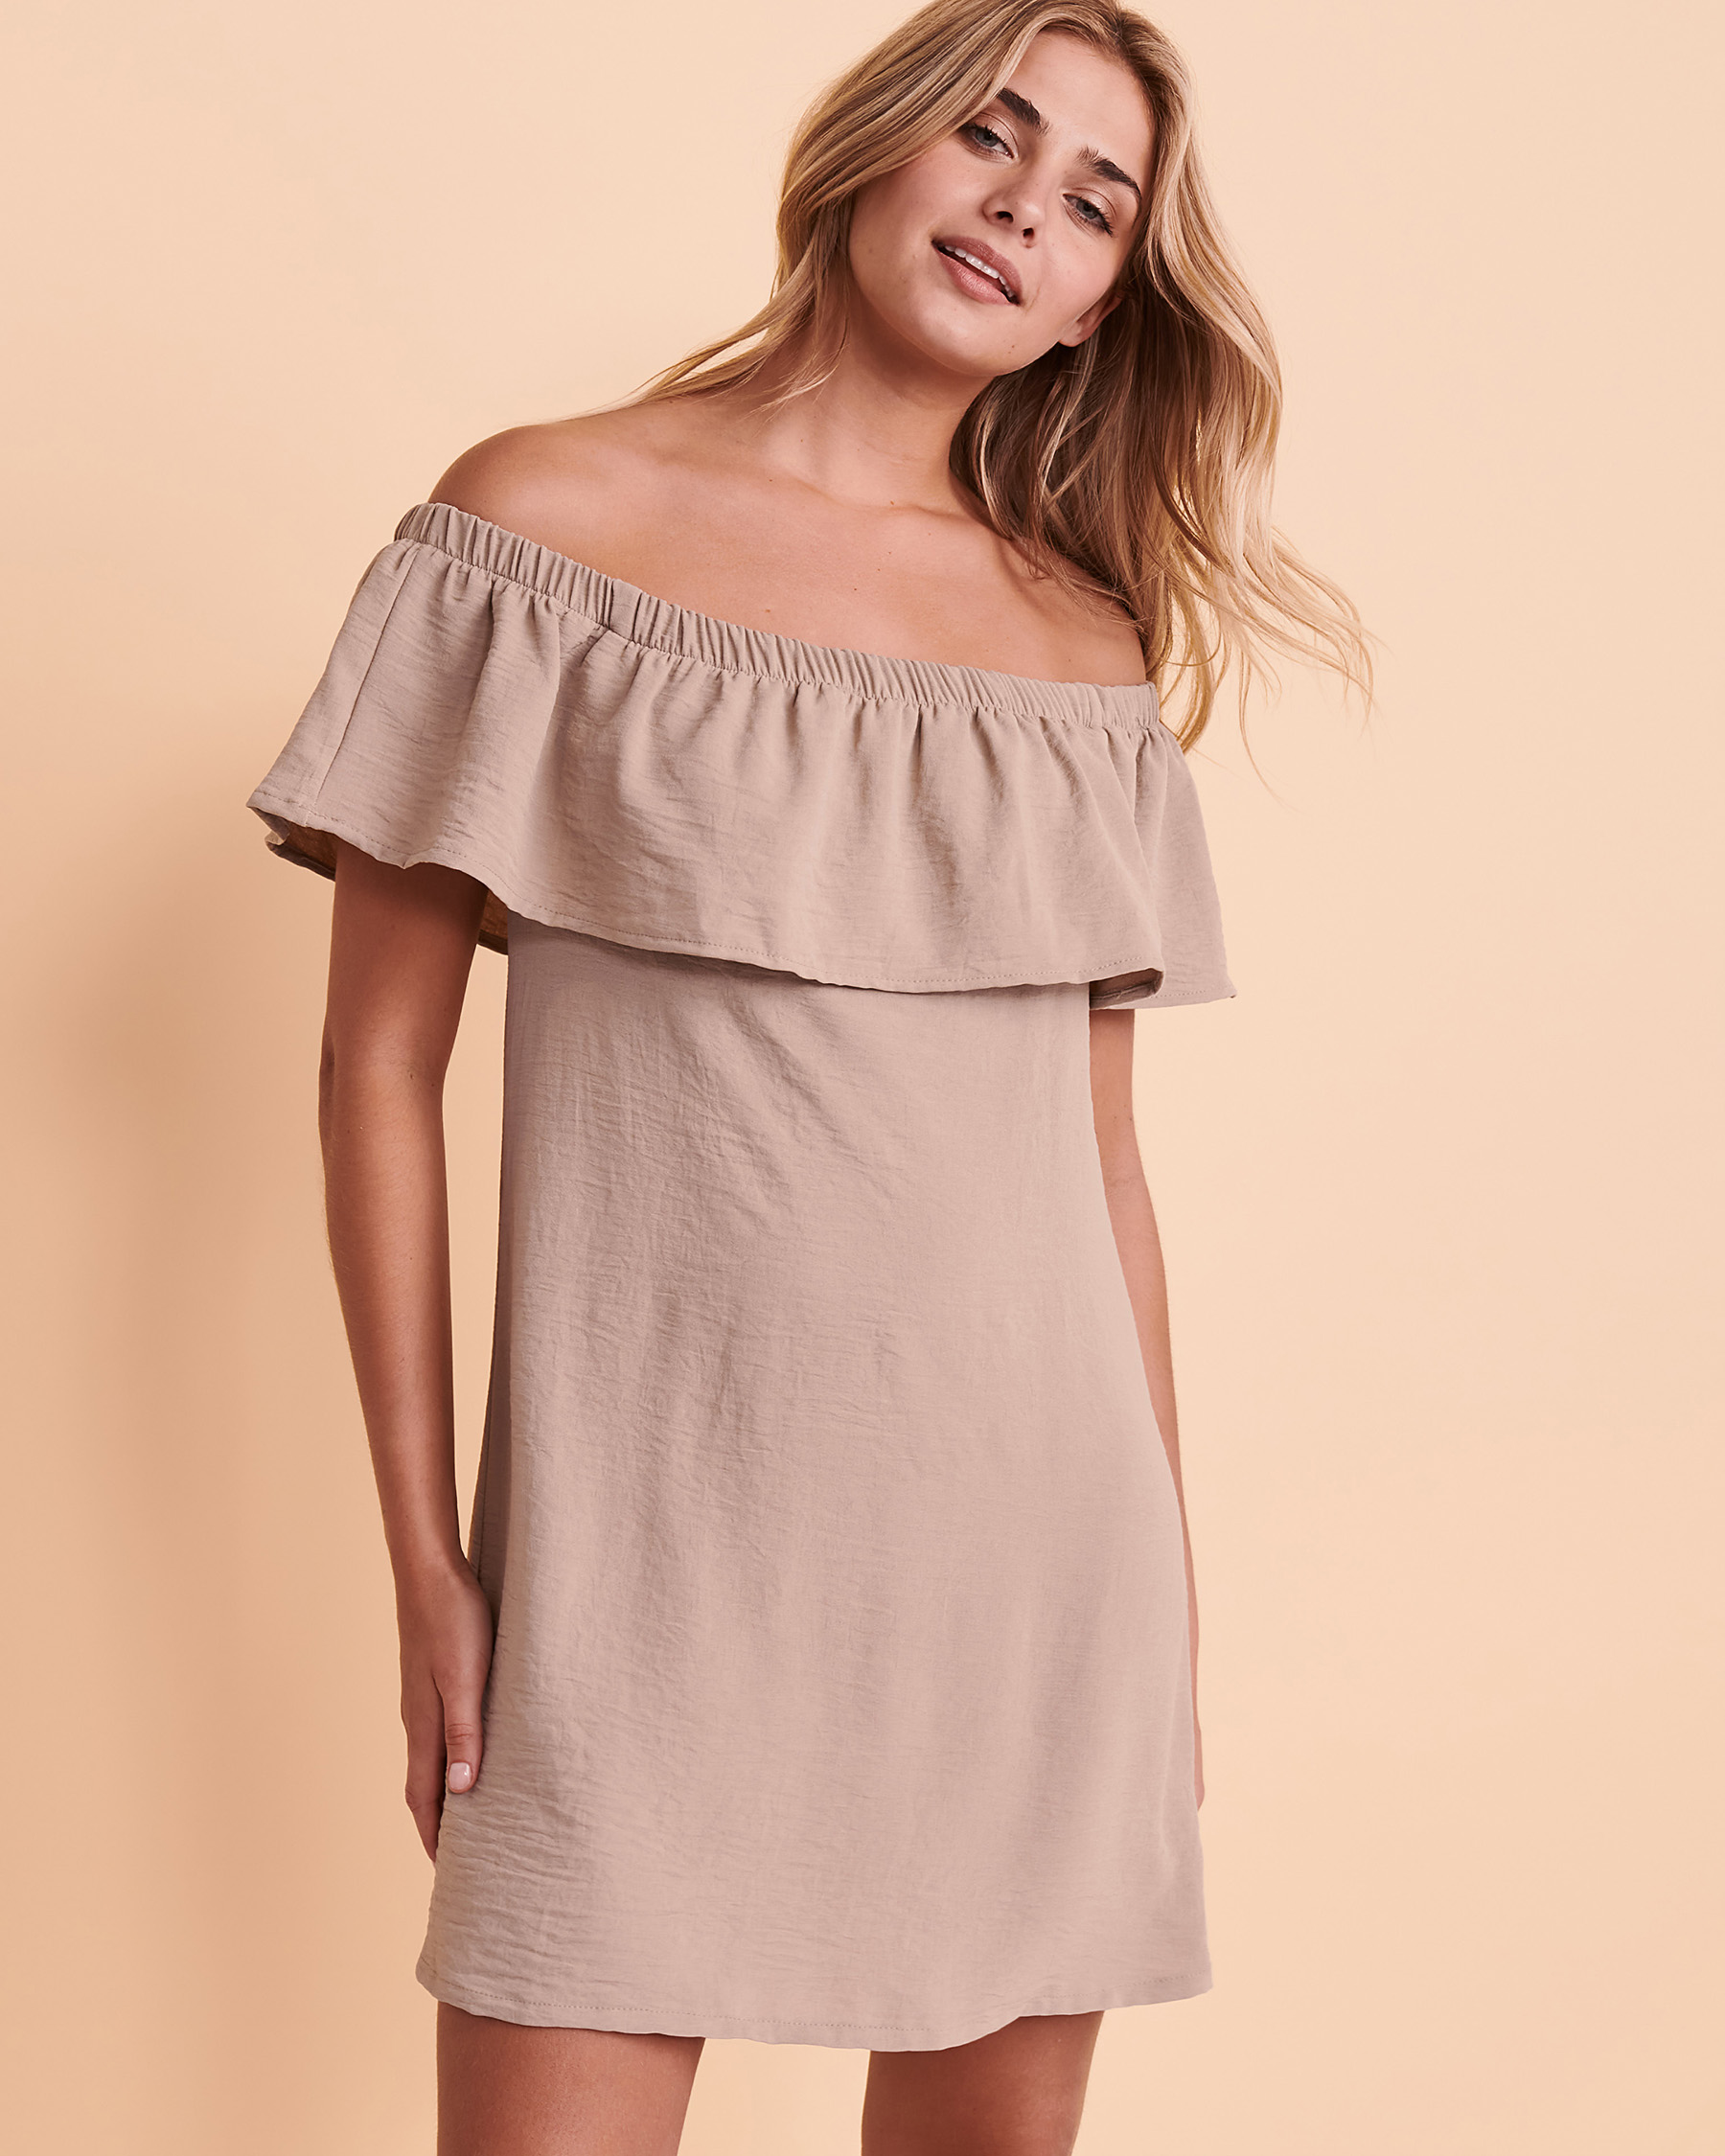 COVER ME Off the Shoulder Dress Tan 22052575 - View1